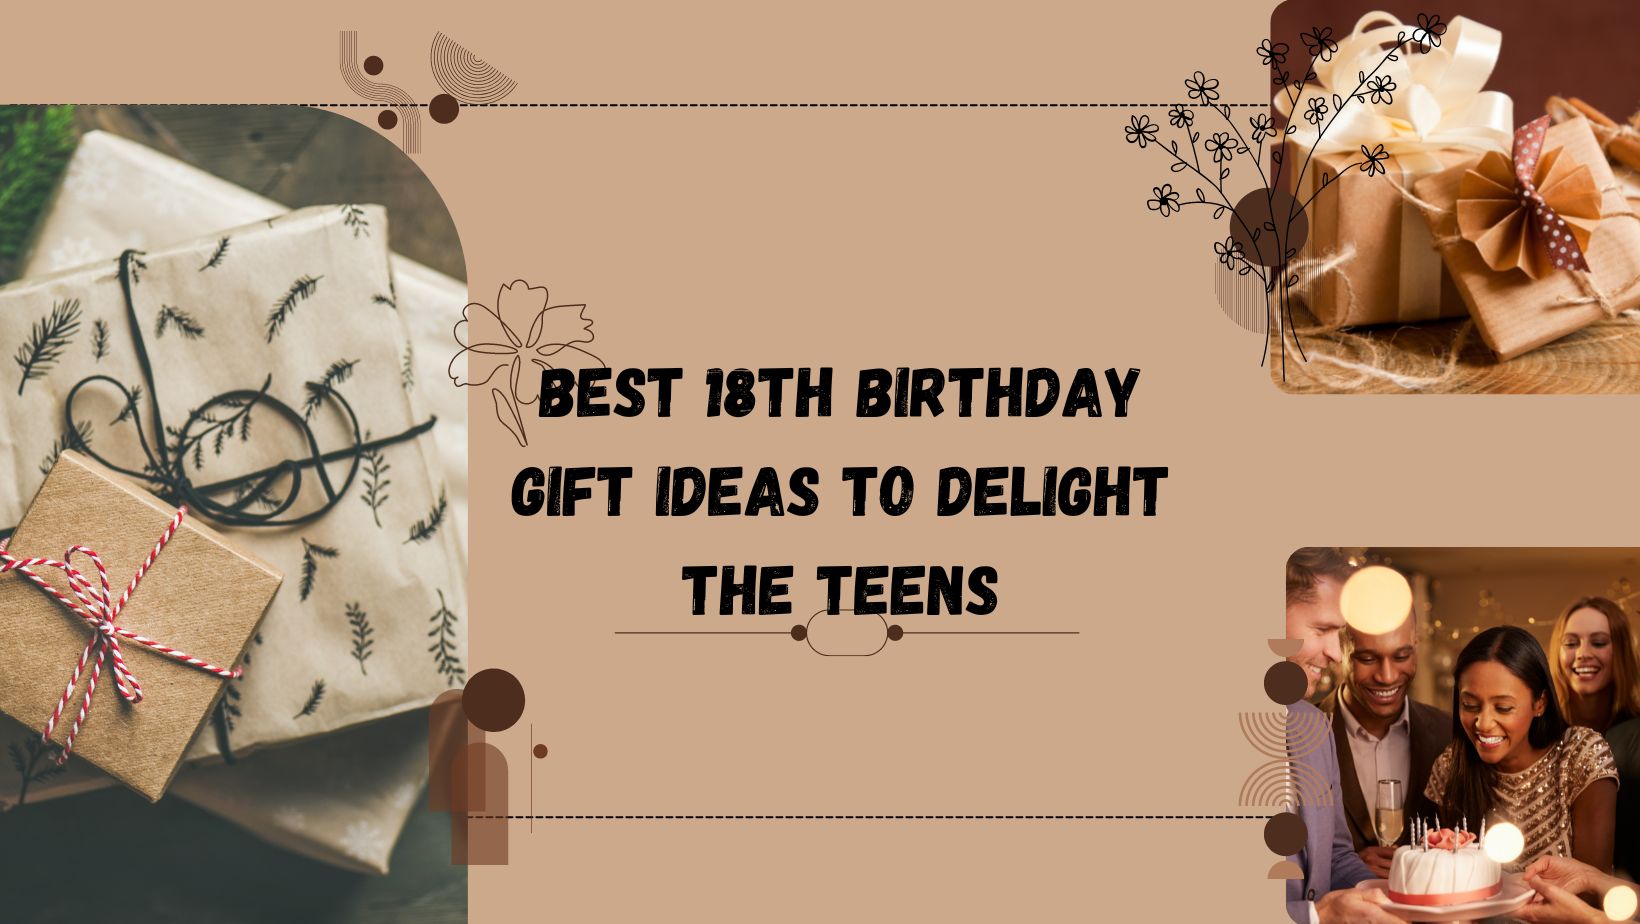 7 Best 18th Birthday Gift Ideas to Delight the Teens